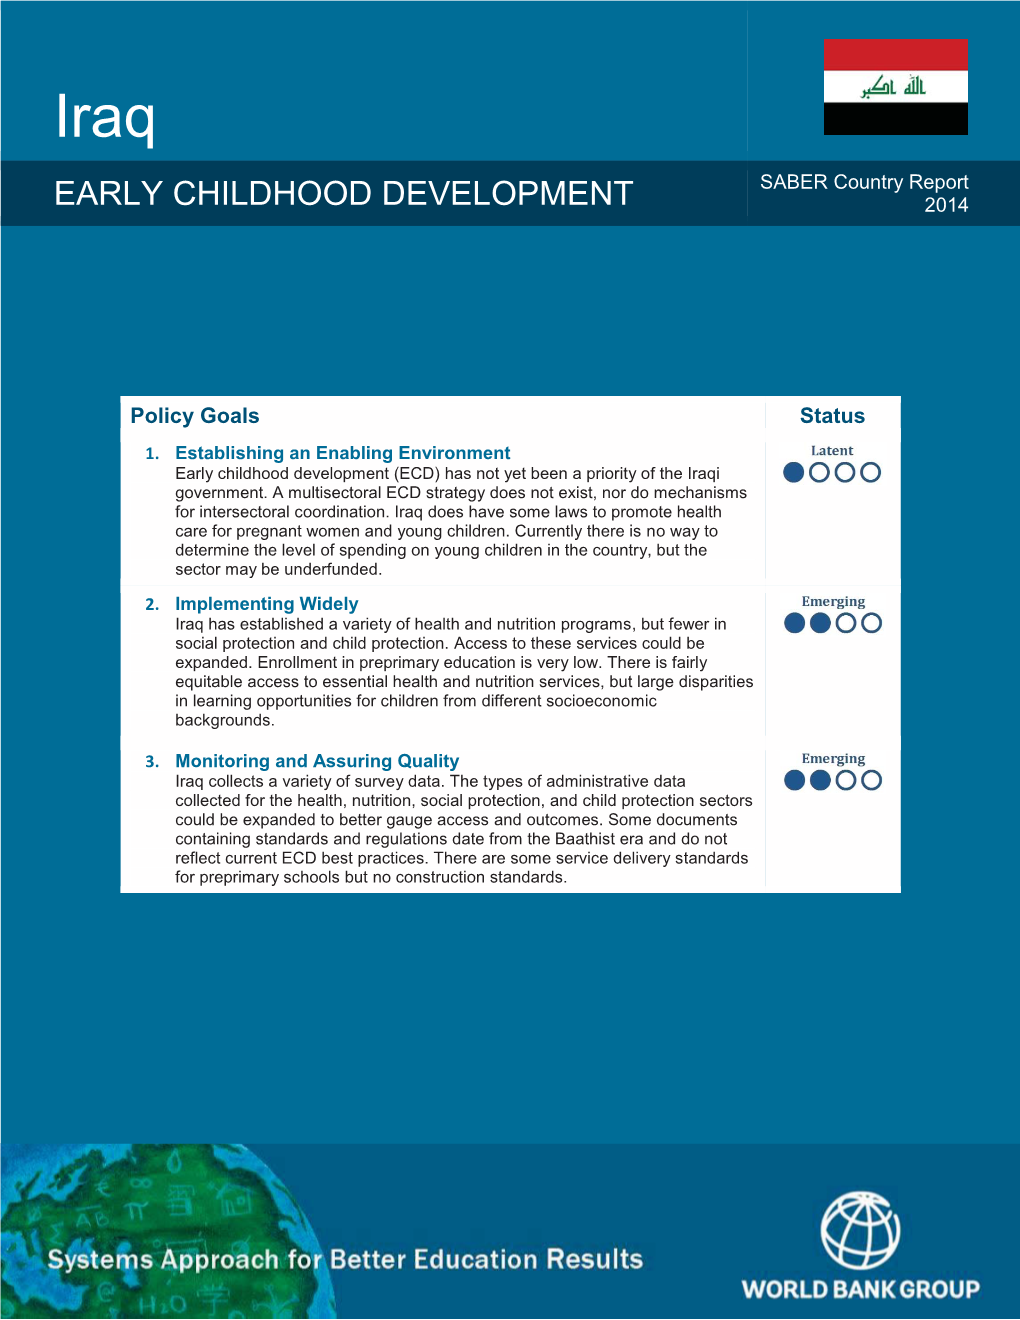 Iraq: Early Childhood Development SABER Country Report